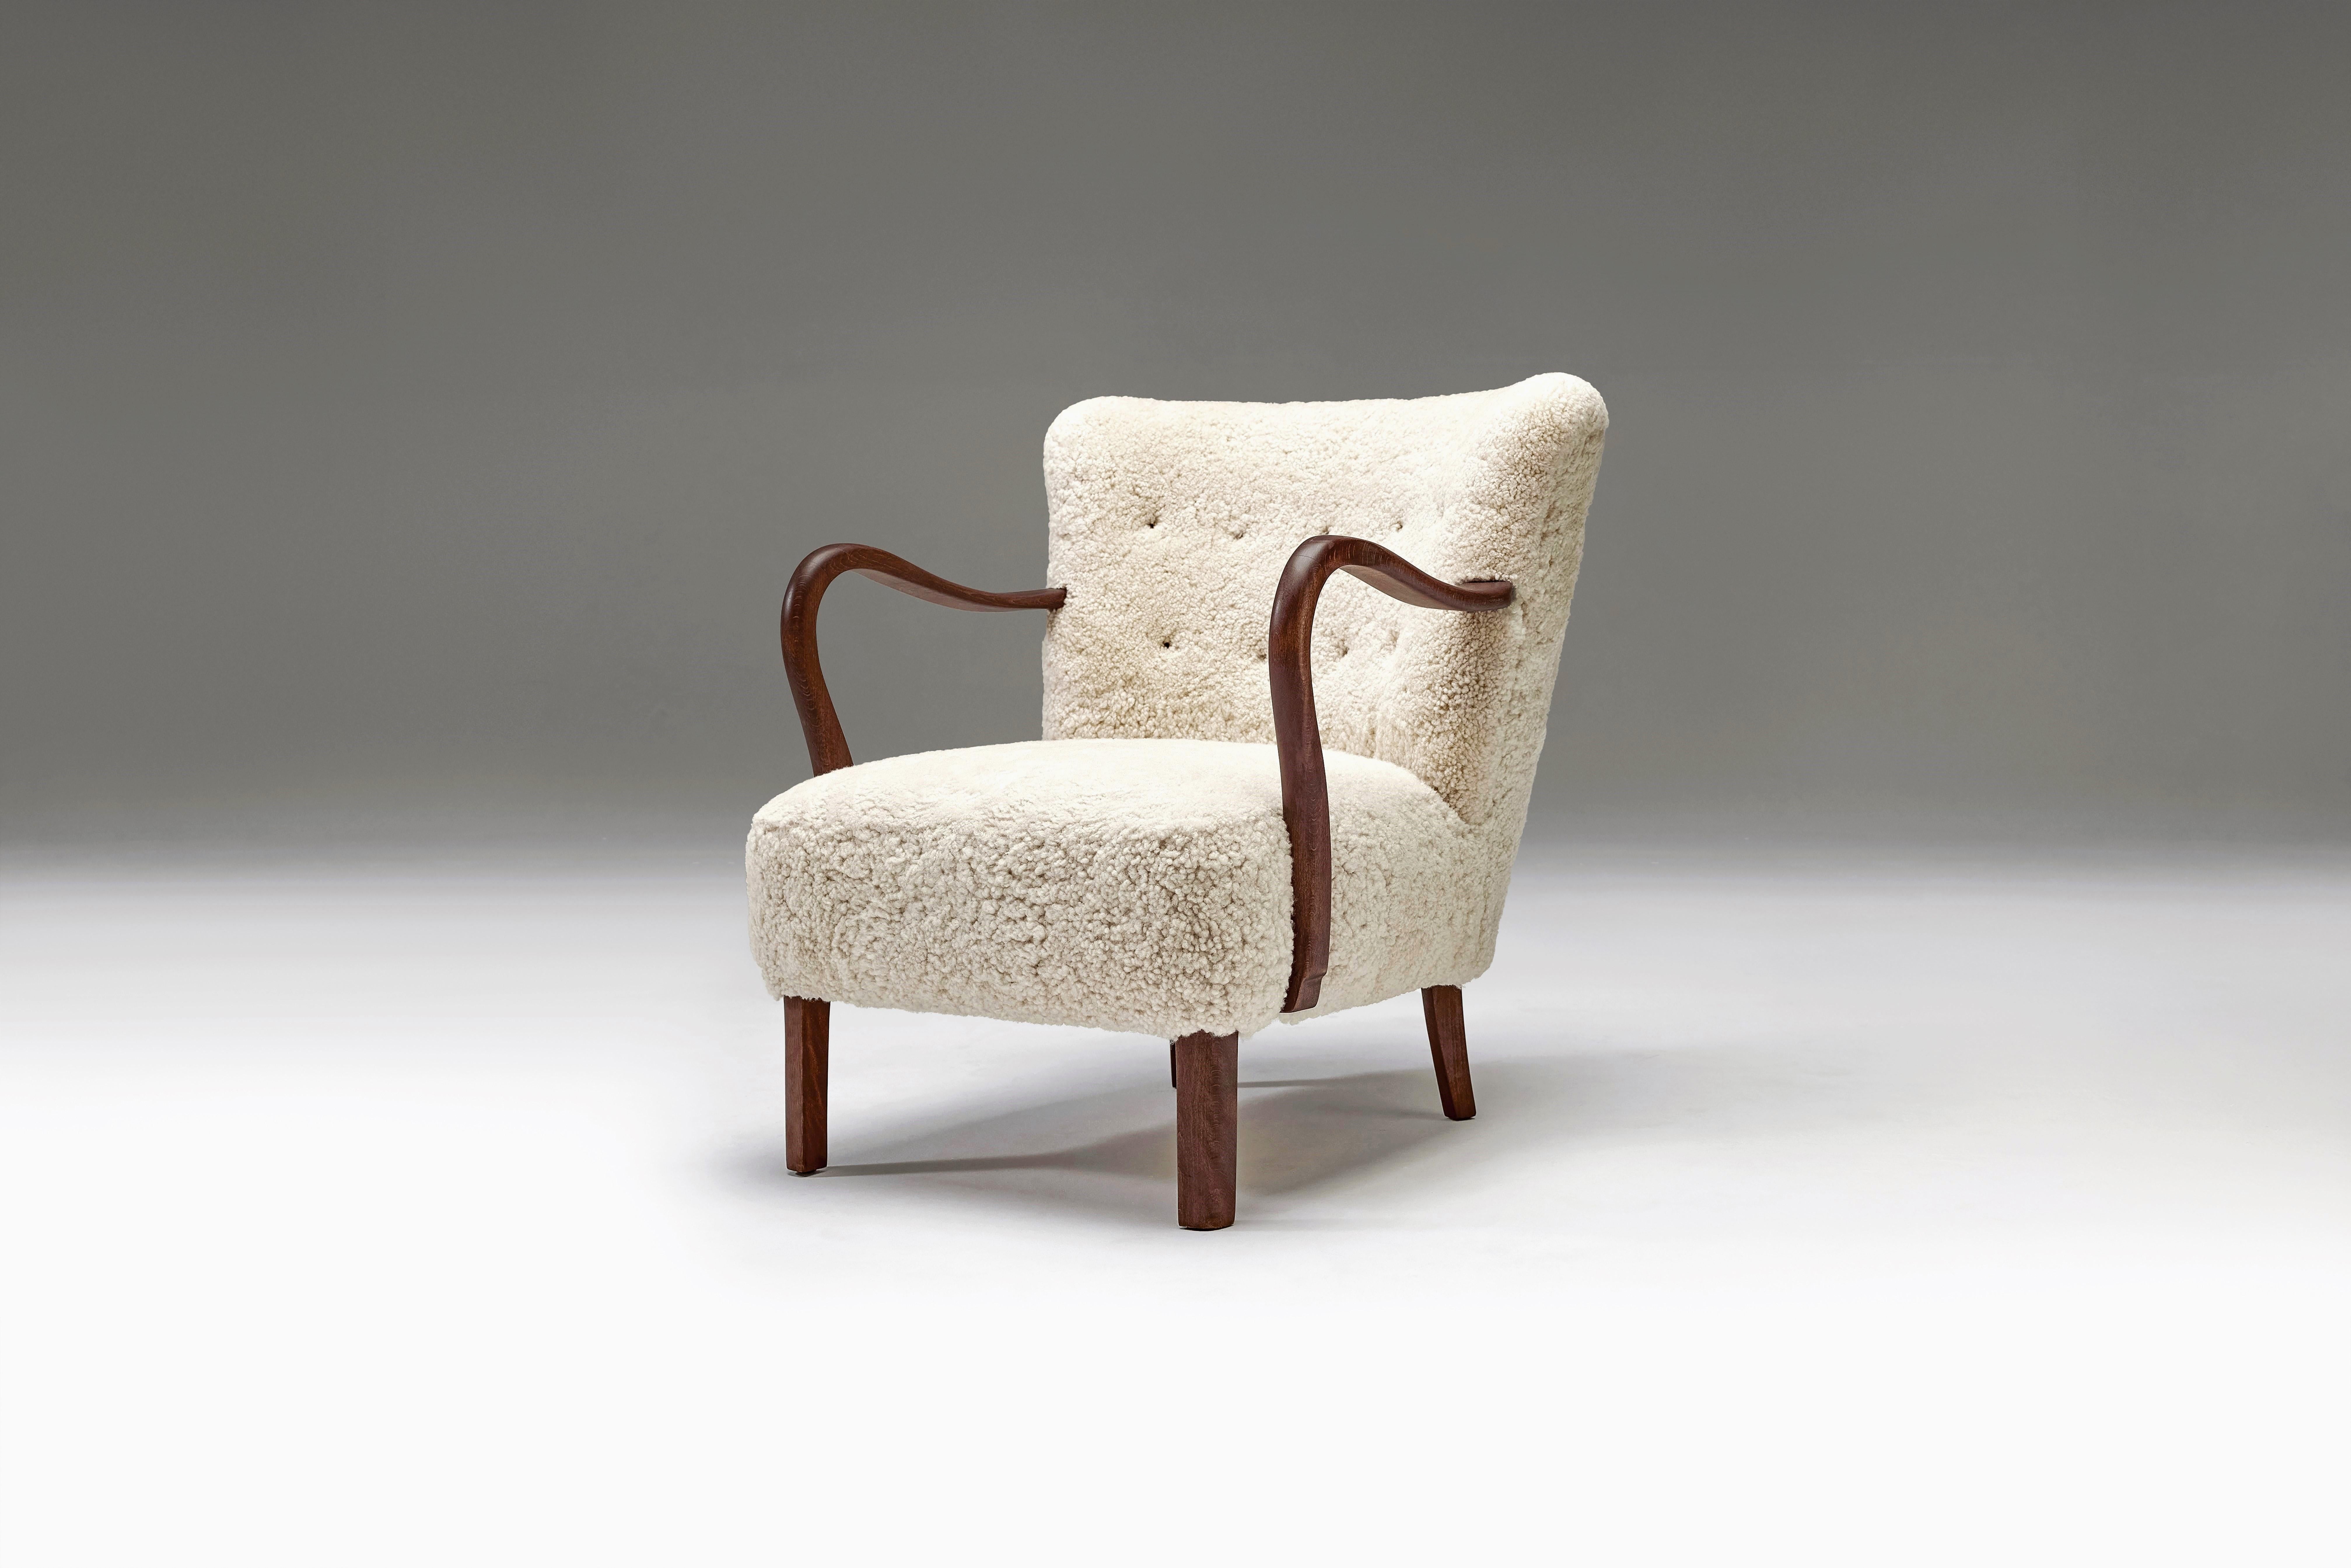 Danish Cabinetmaker's exquisite craftsmanship and emphasis on modern aesthetics are evident in this beautiful armchair. It seamlessly blends the timeless appeal of traditional design with the contemporary sensibilities of Danish Modern style.

The